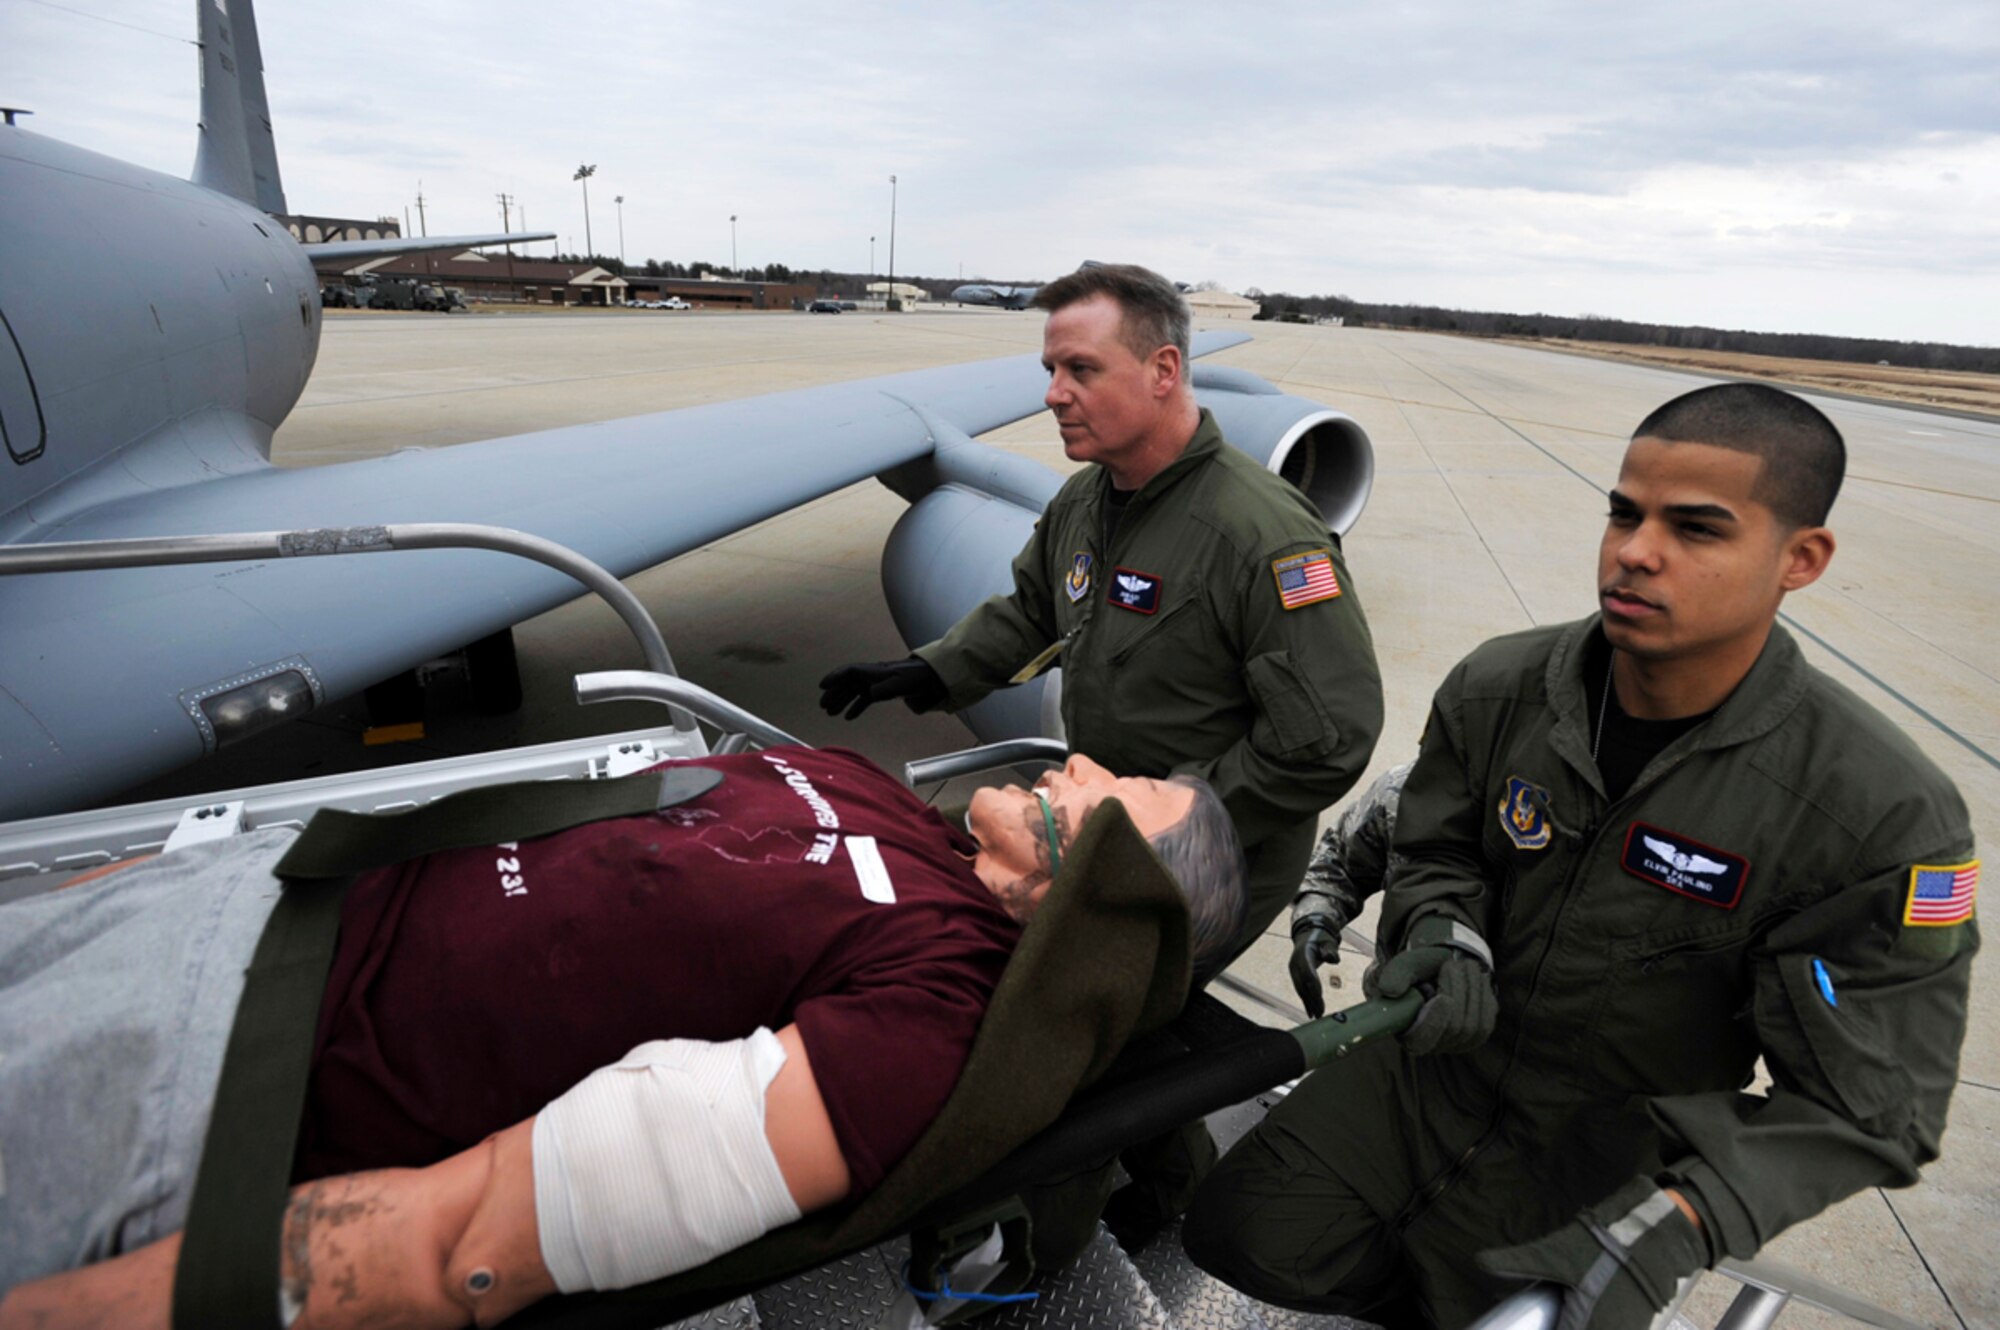 Master Sgt. John Kley (left) and Senior Airman Elivin Paulino help load a mock patient aboard a KC-135 Stratotanker at McGuire Air Force Base, N.J. A KC-135 crew from the 931st Air Refueling Group at McConnell Air Force Base, Kan., picked up medical Reservists assigned to McGuire mid-day Friday at the start of three-day aeromedical evacuation training mission. Sergeant Kley and Airman Paulino are assigned to the 514th Aeromedical Evacuation Squadron at McGuire AFB. (U.S. Air Force photo/Tech. Sgt. Jason Schaap